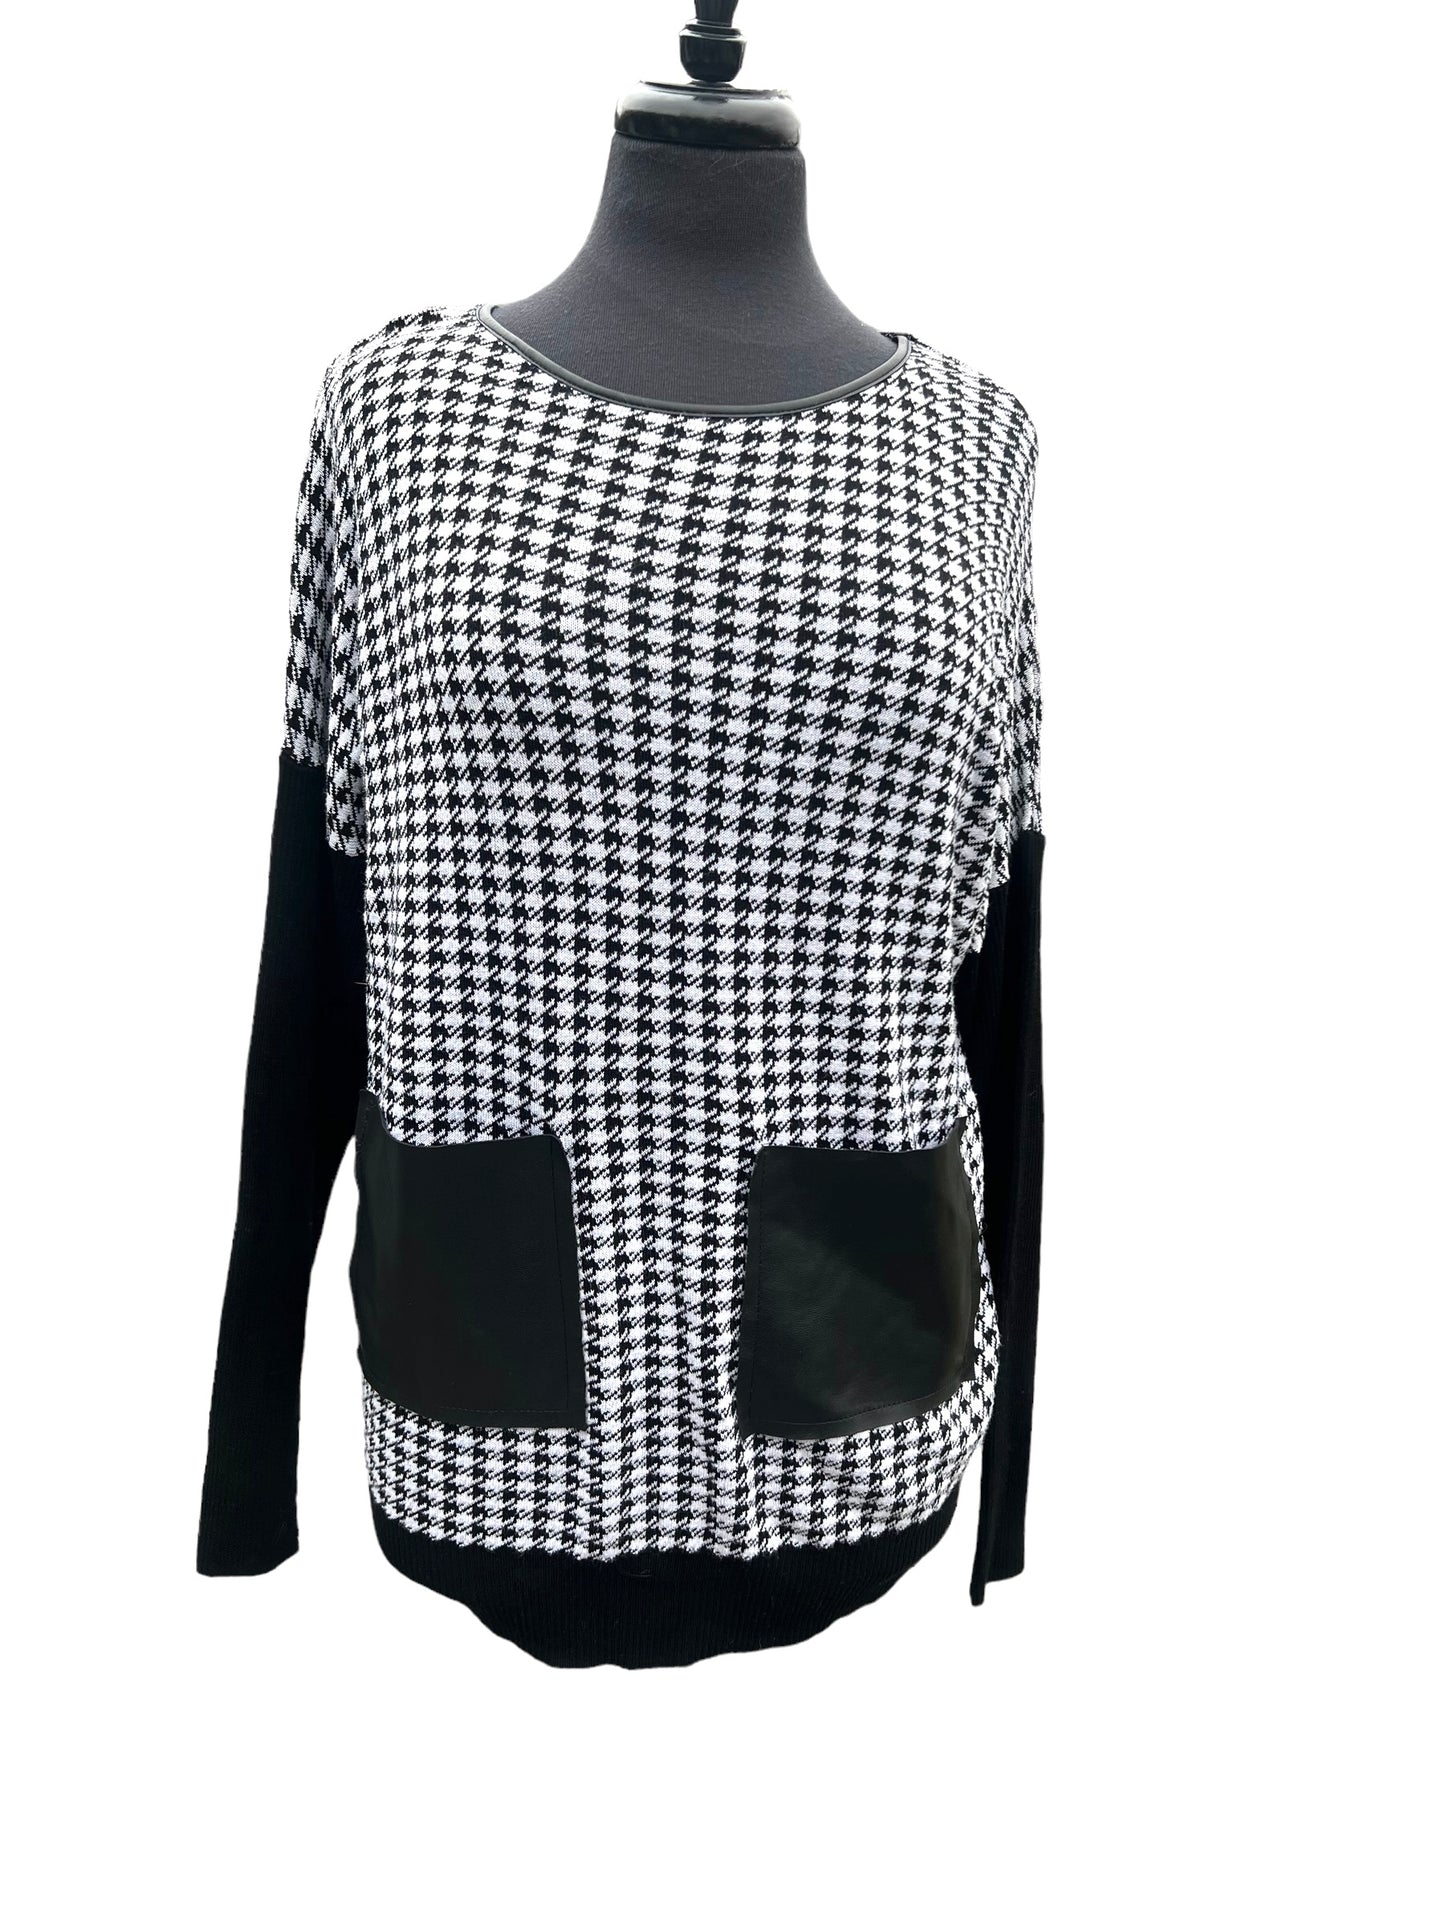 Suzy Shier Dogtooth Sweater